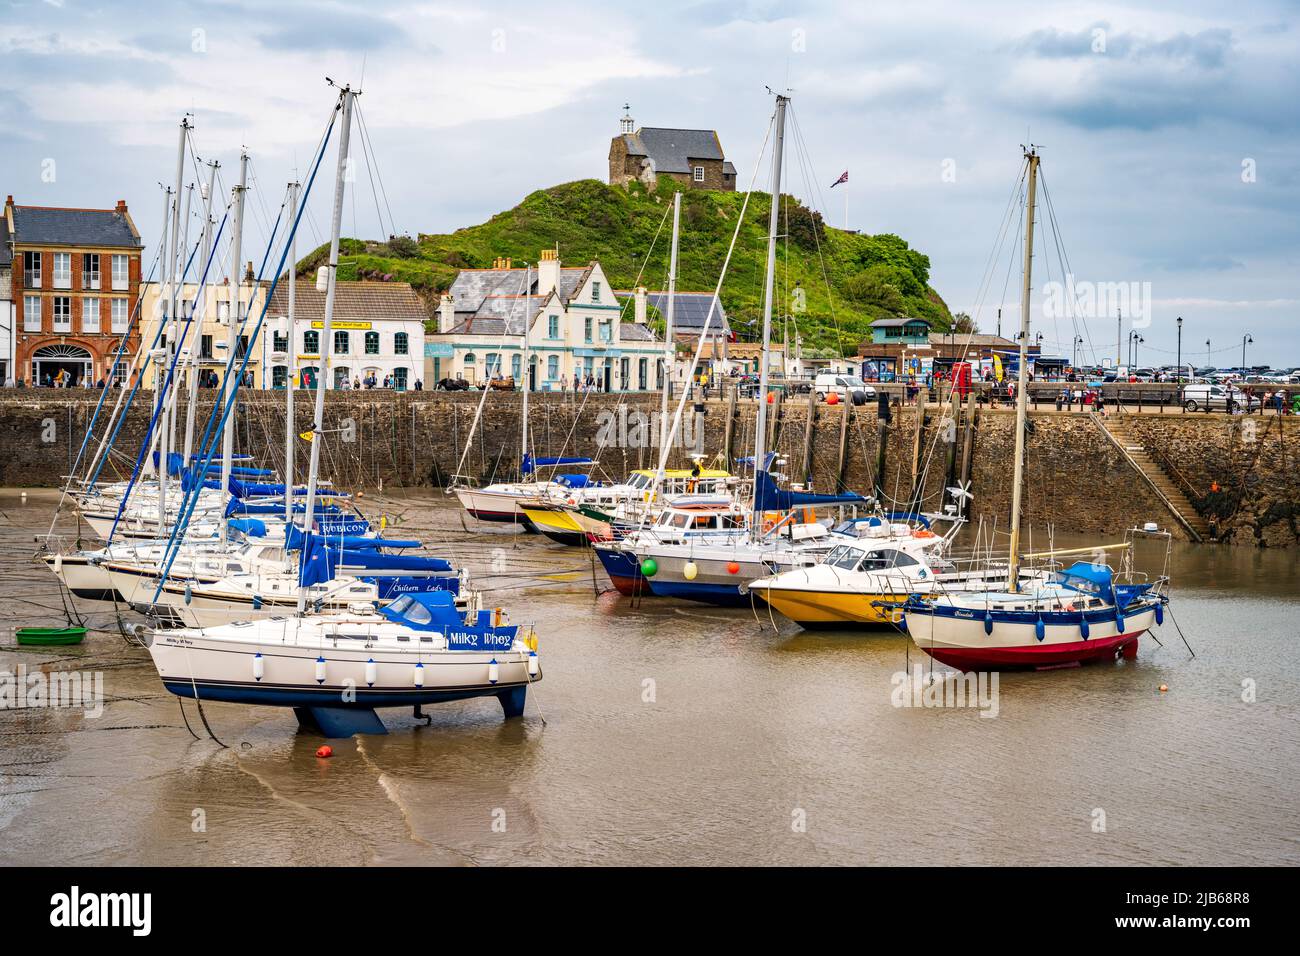 The harbour at the seaside resort town of Ilfracombe, Devon, UK.  St. Nicholas's Chapel on Lantern Hill overlooks the harbour. Stock Photo